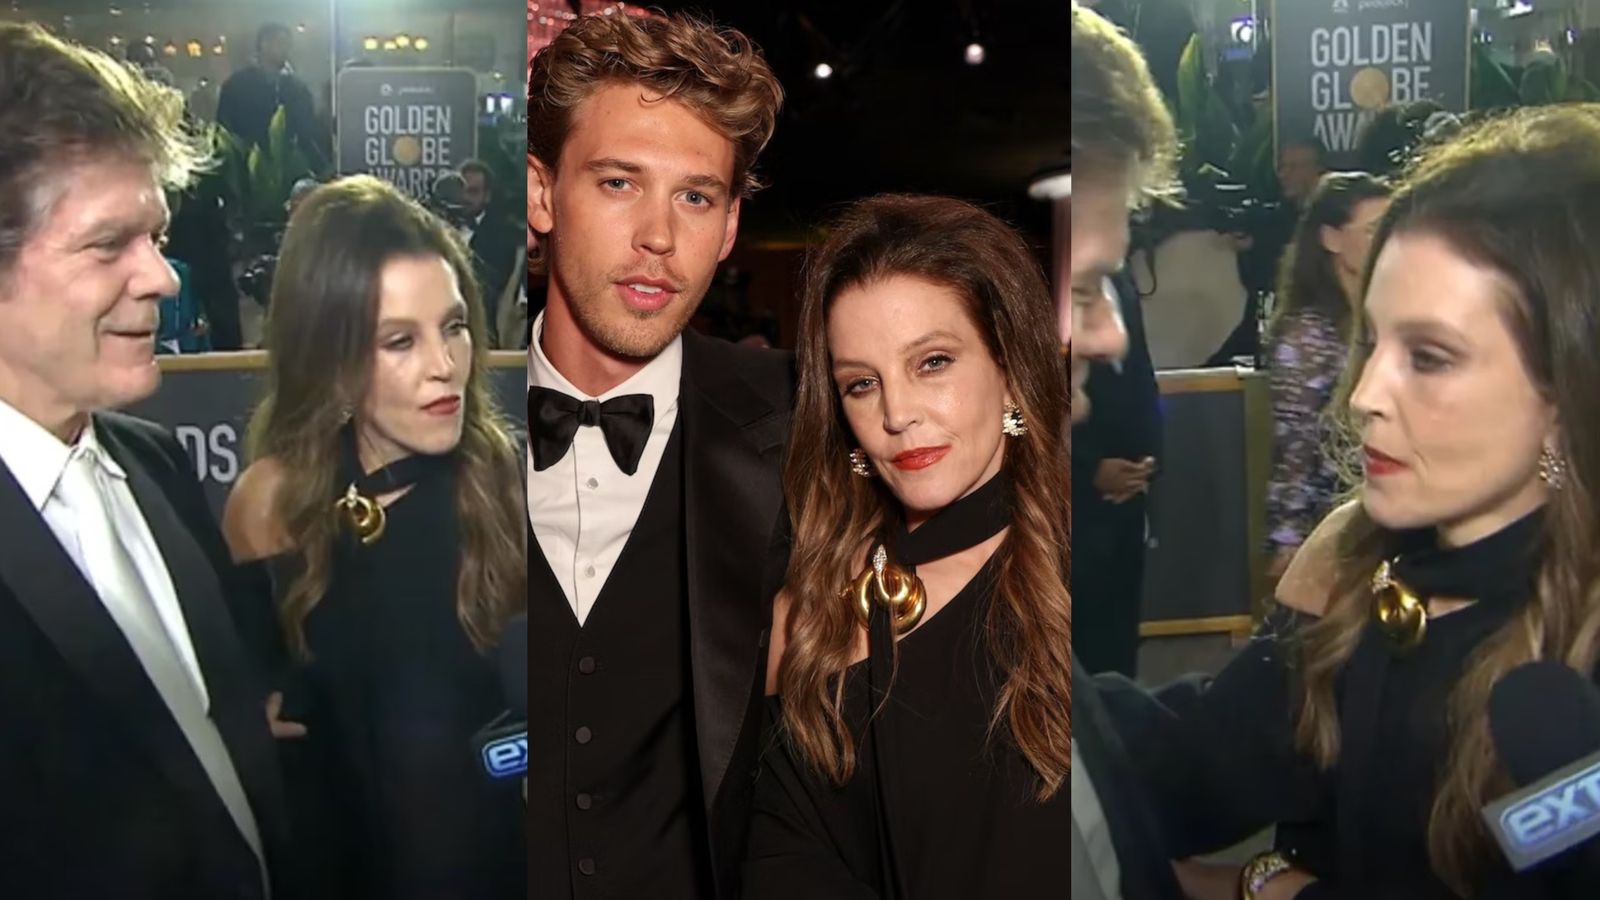 The alarming signs of Lisa Marie Presley during the Golden Globes awards (Photos: YouTube/ Extra TV/ Getty Images)